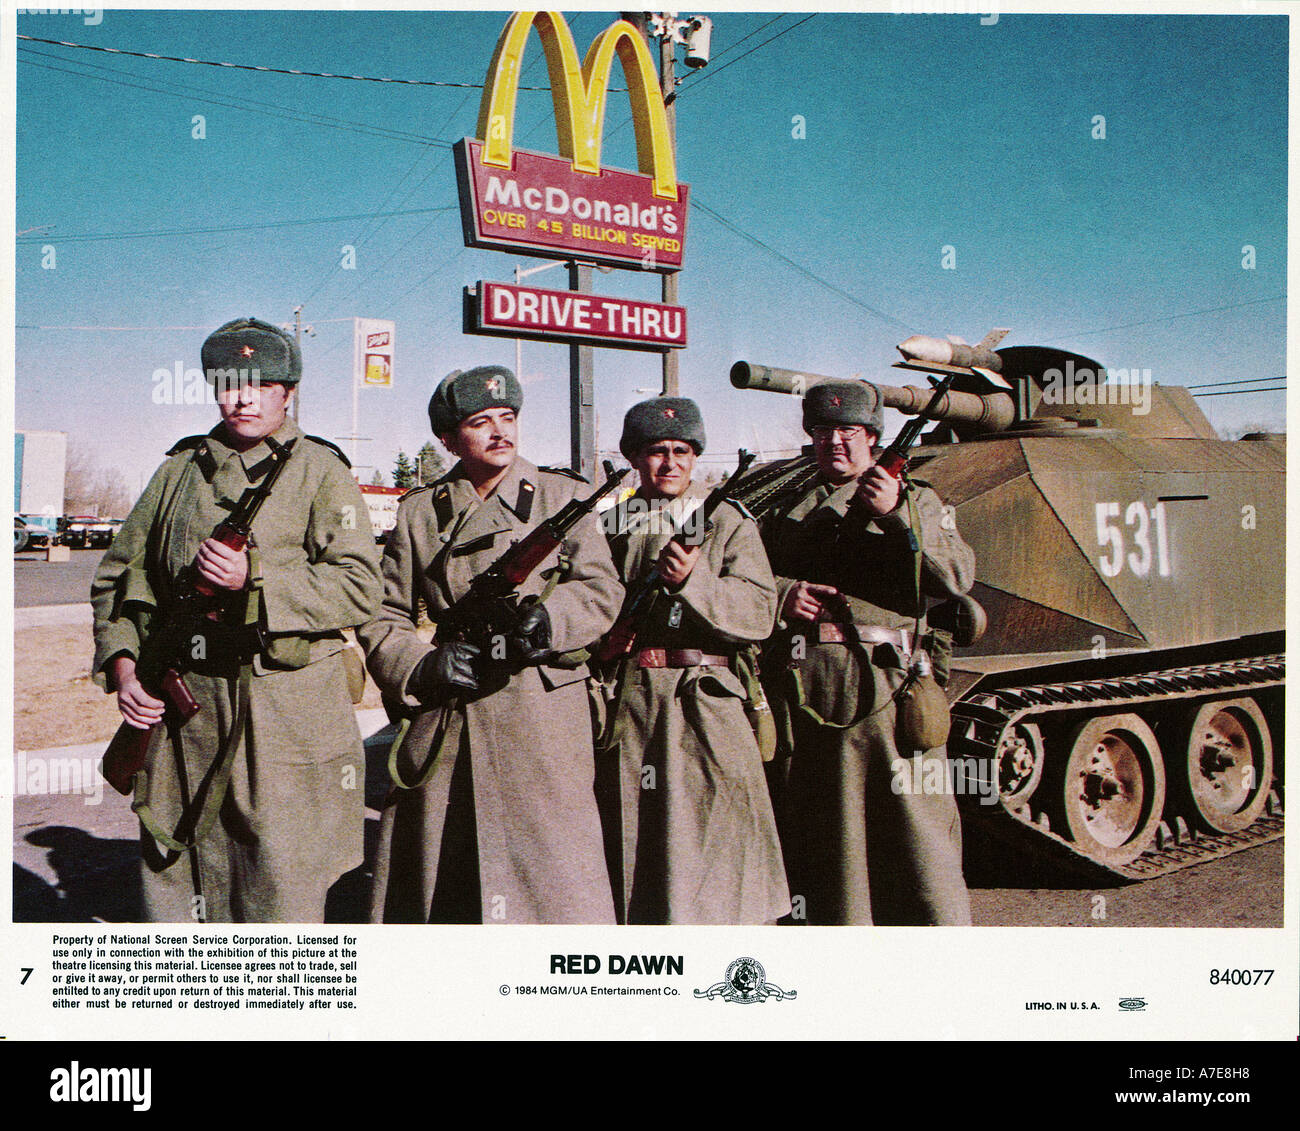 RED DAWN 1984 MGM film Stock Photo